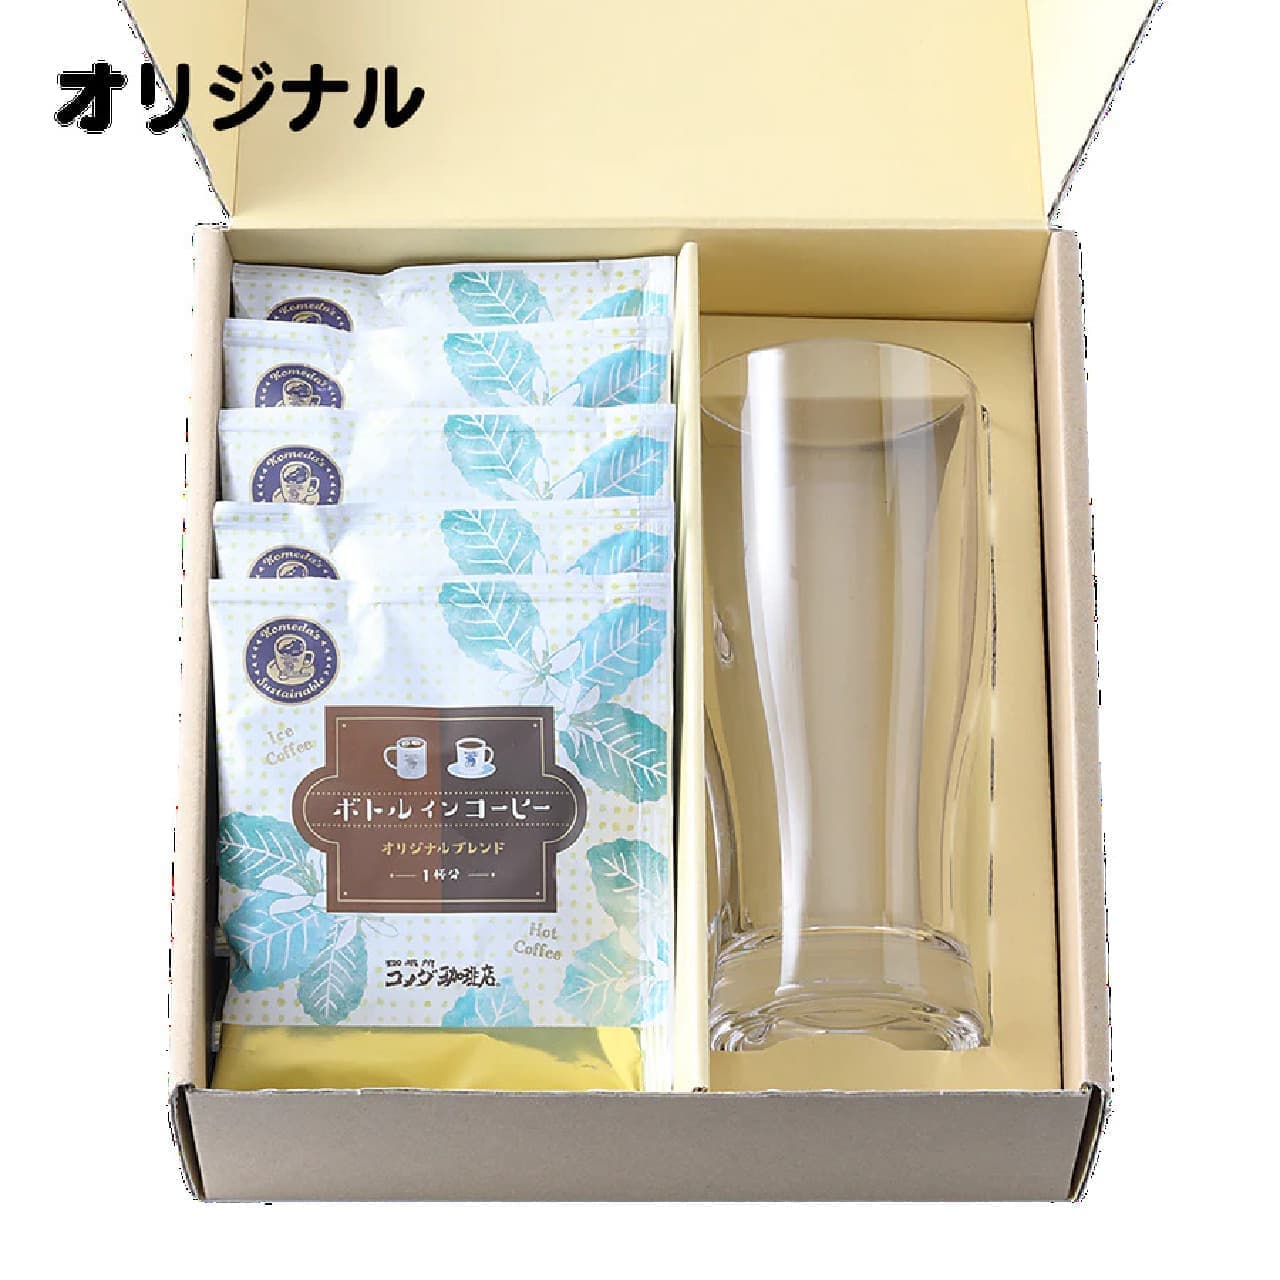 Online gift summary for Komeda Coffee Shop!